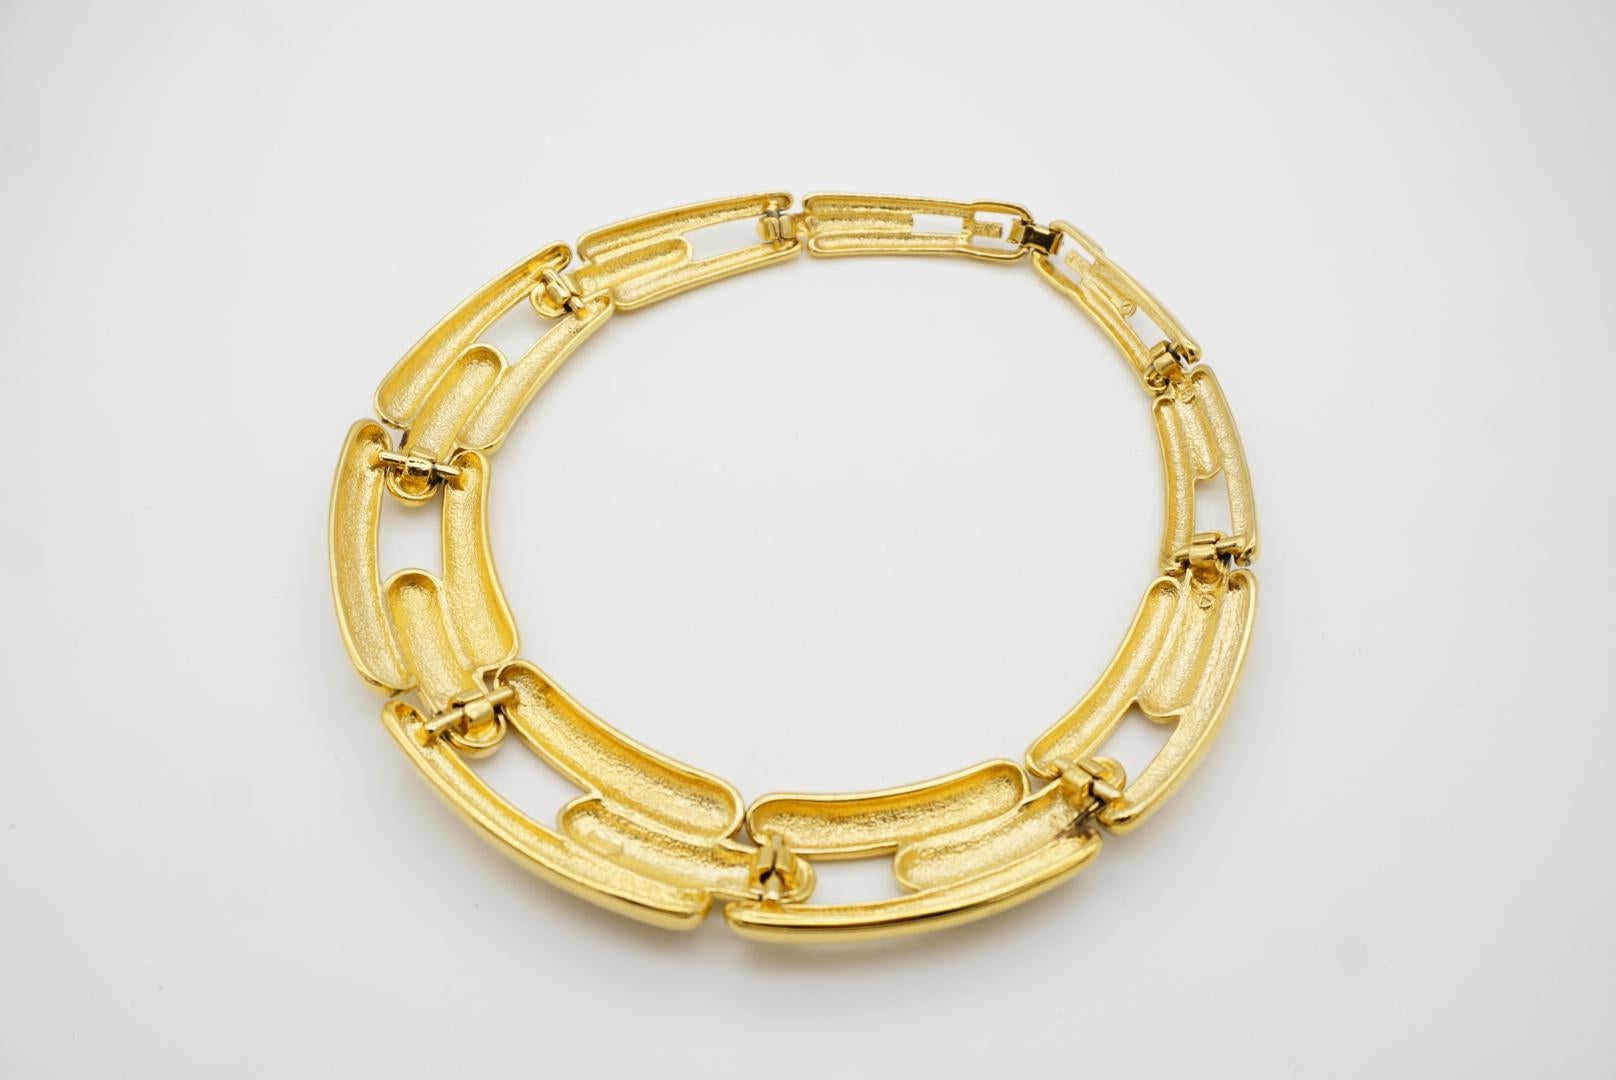 Givenchy Vintage 1980s Chunky Watch Link Interlock Gold Collar Choker Necklace For Sale 6